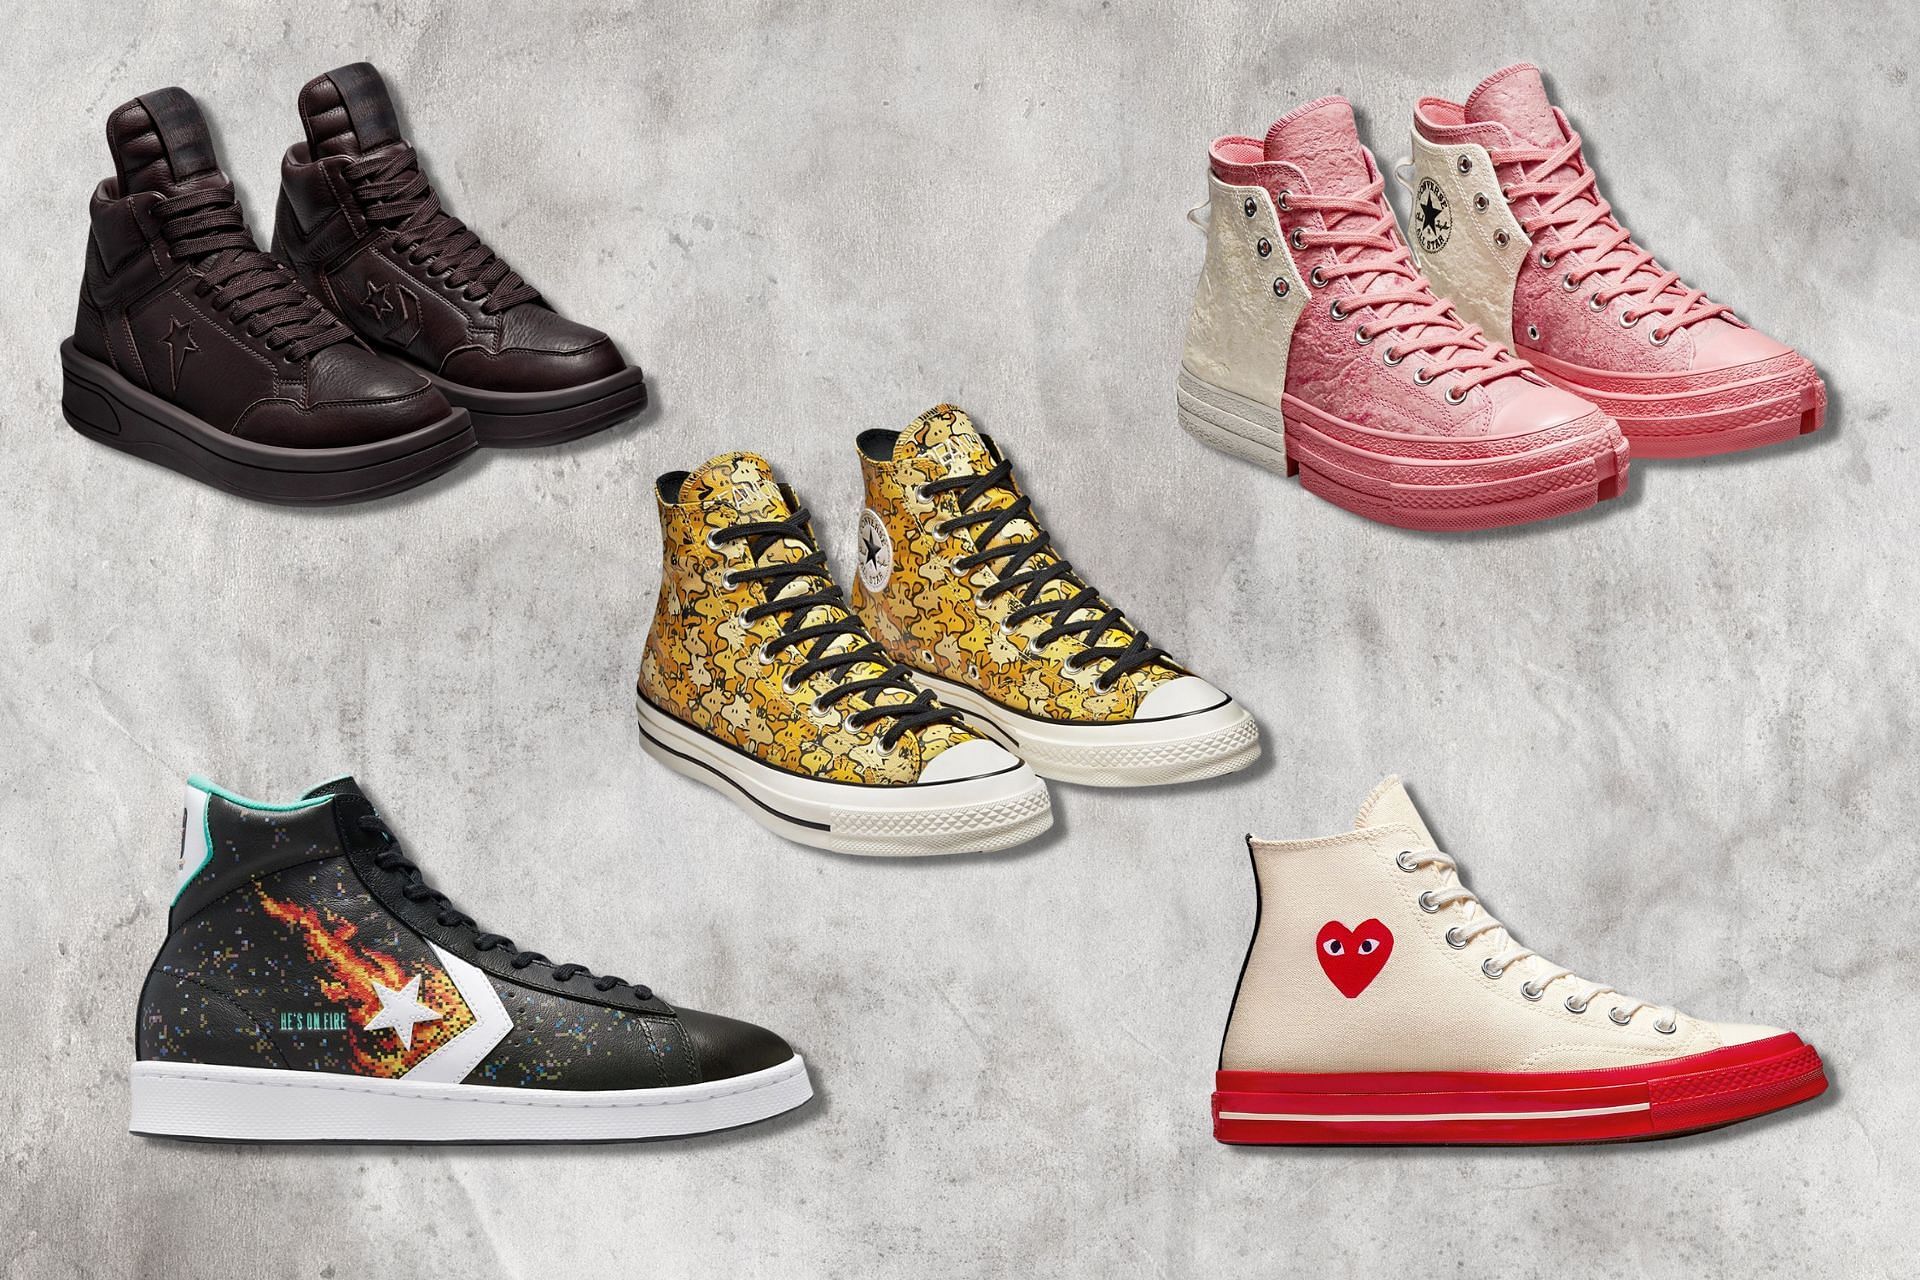 5 best Converse high tops colorways